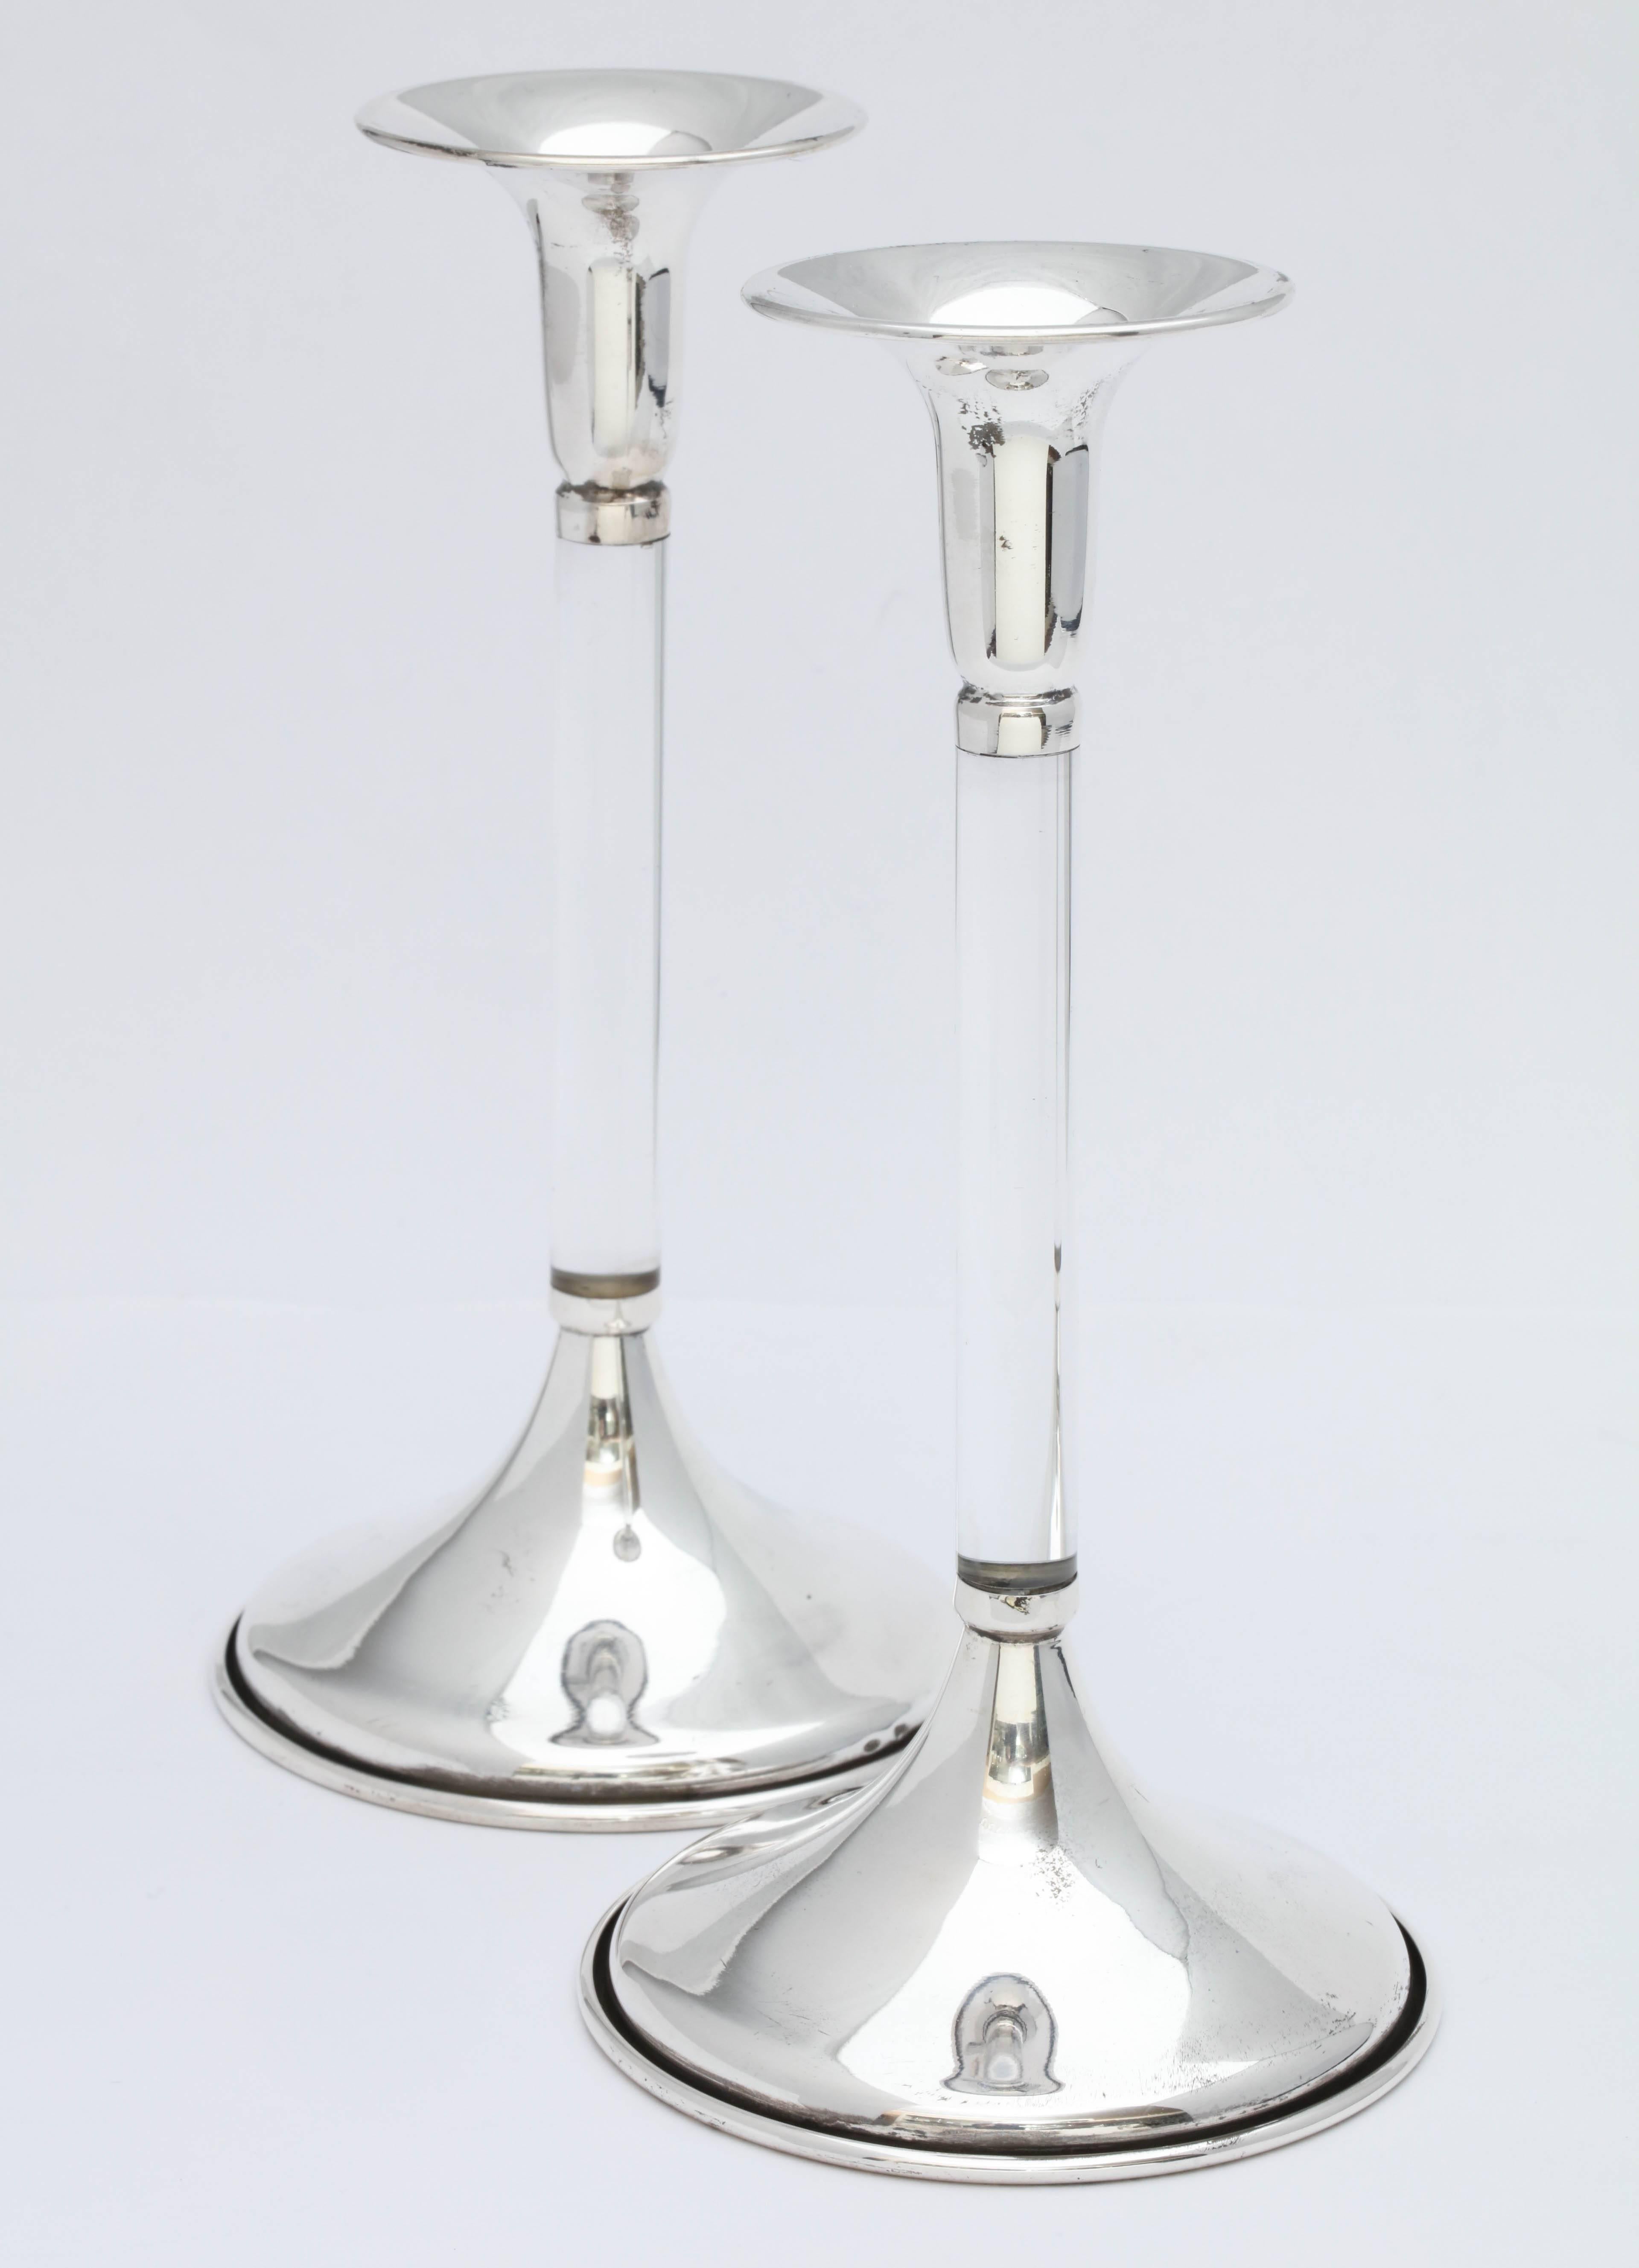 Pair of Mid-Century Modern, sterling silver-mounted Lucite candlesticks, European, circa 1950s-1960s. 7 inches high x 3 1/2 inches diameter across base of each x 2 inches diameter across sterling silver candle cup. Weighted; underside of each is